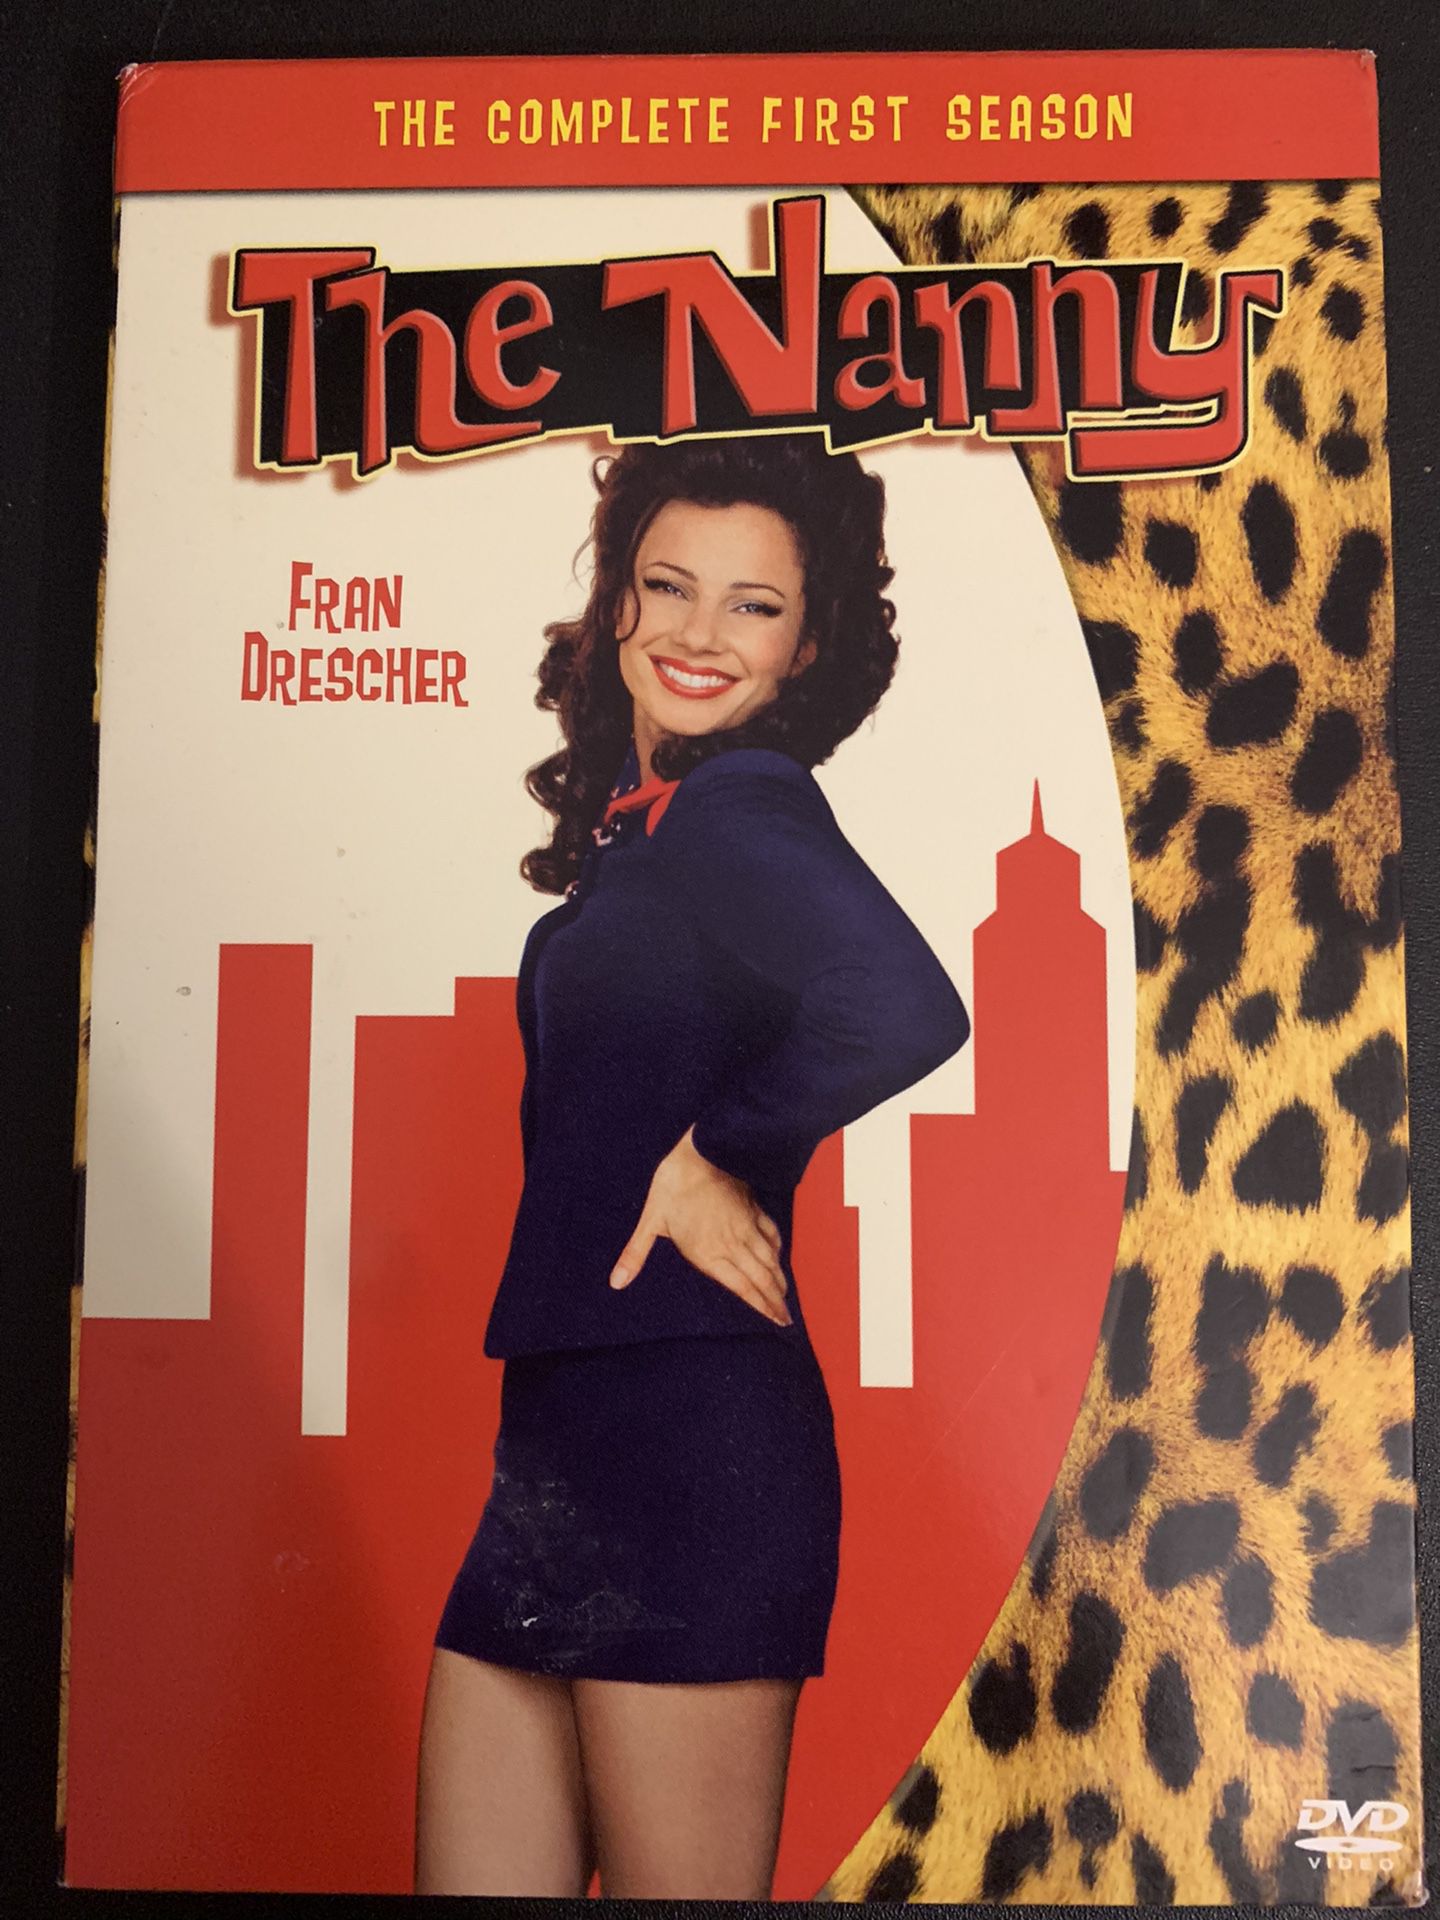 The NANNY The Complete 1st Season (DVD)